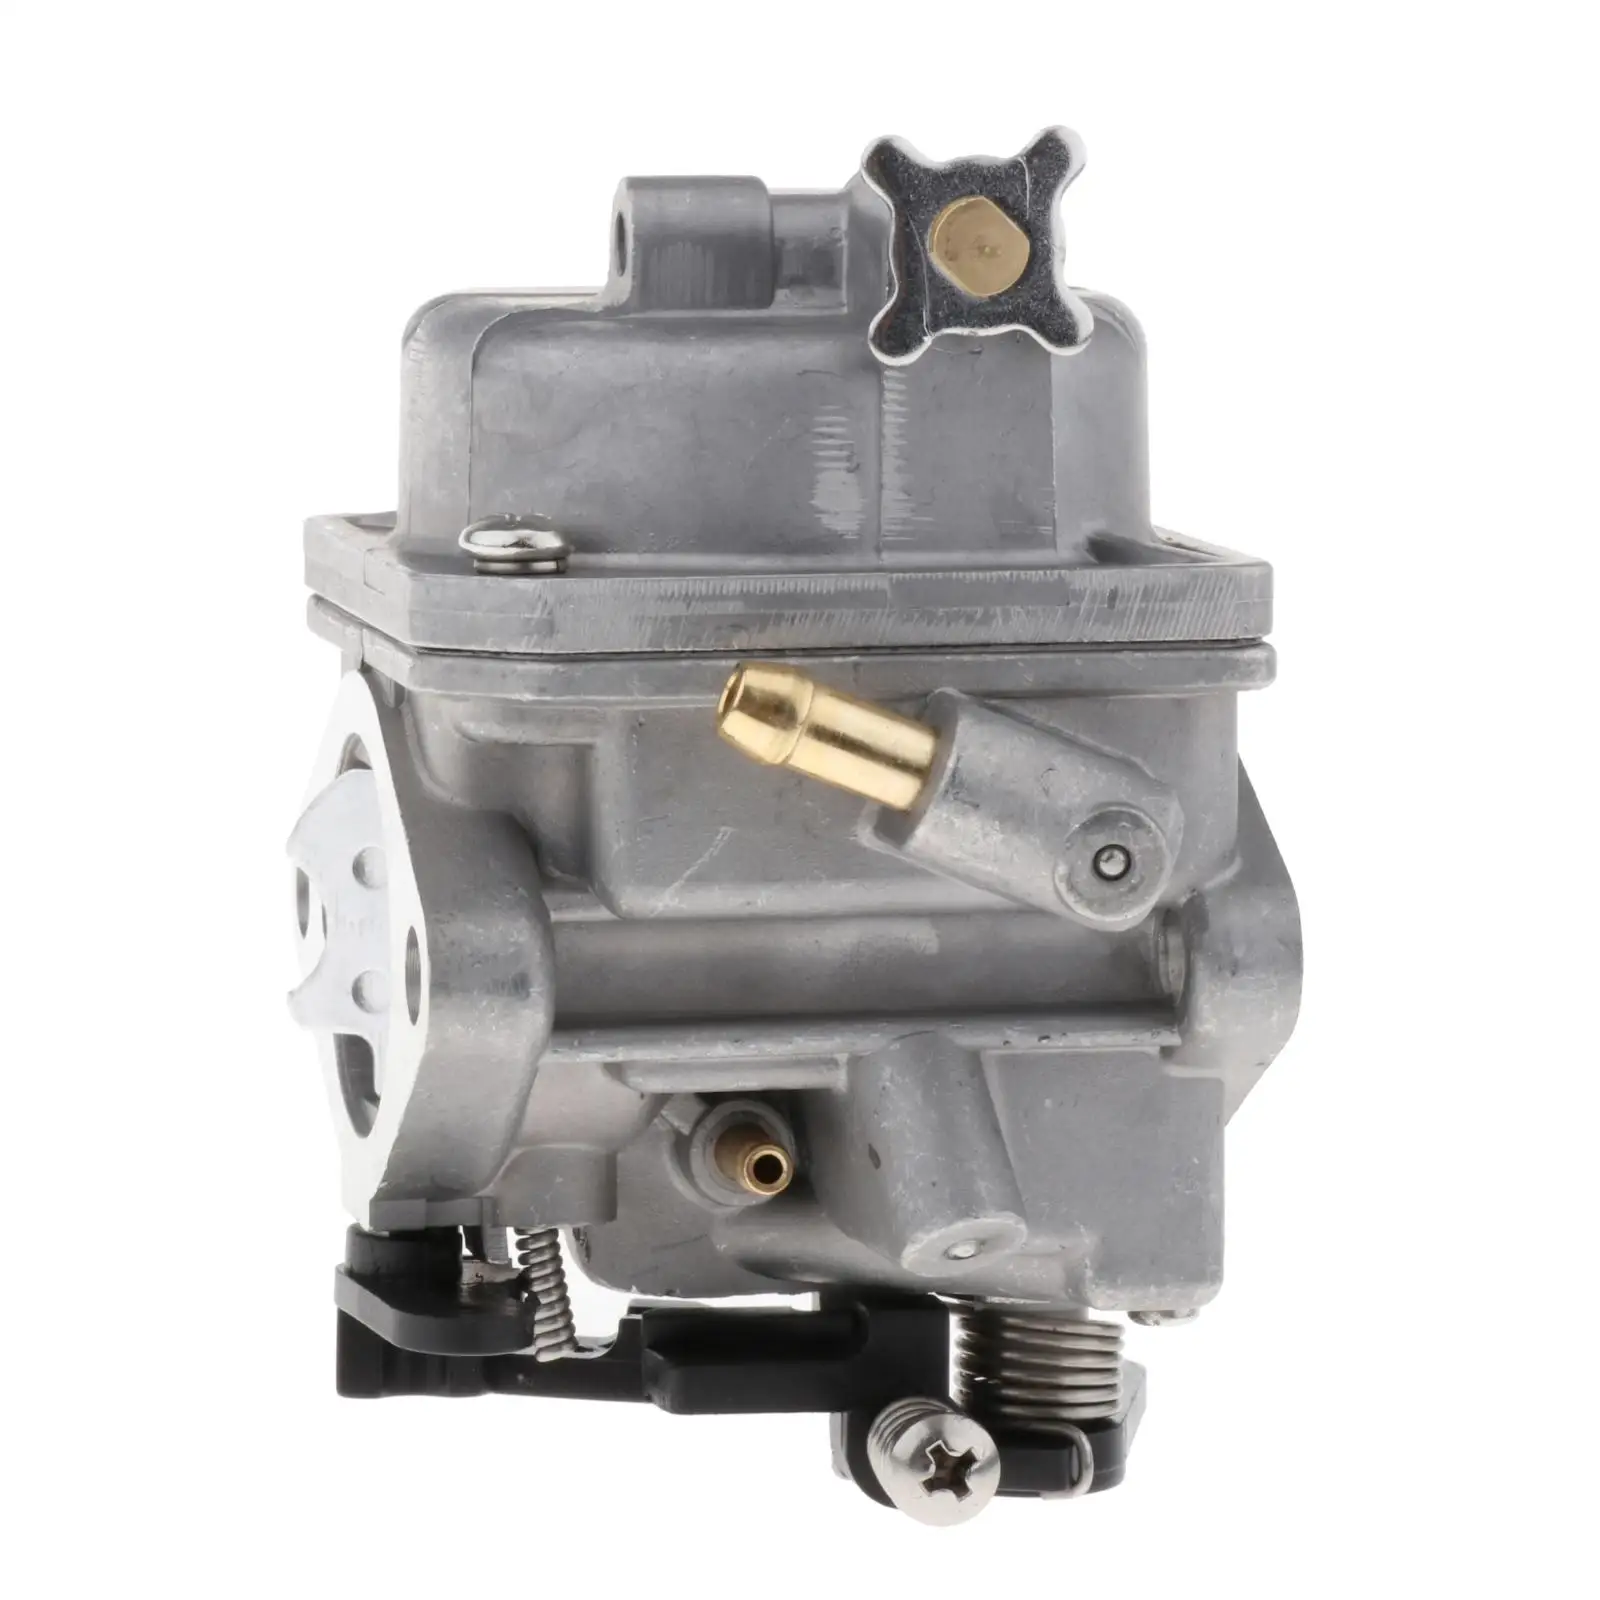 Outboard Engine Premium Quality 16100-ZV1-A01 Carburetor Carb Assy for Honda BC05B BF 5 HP Replacement Parts